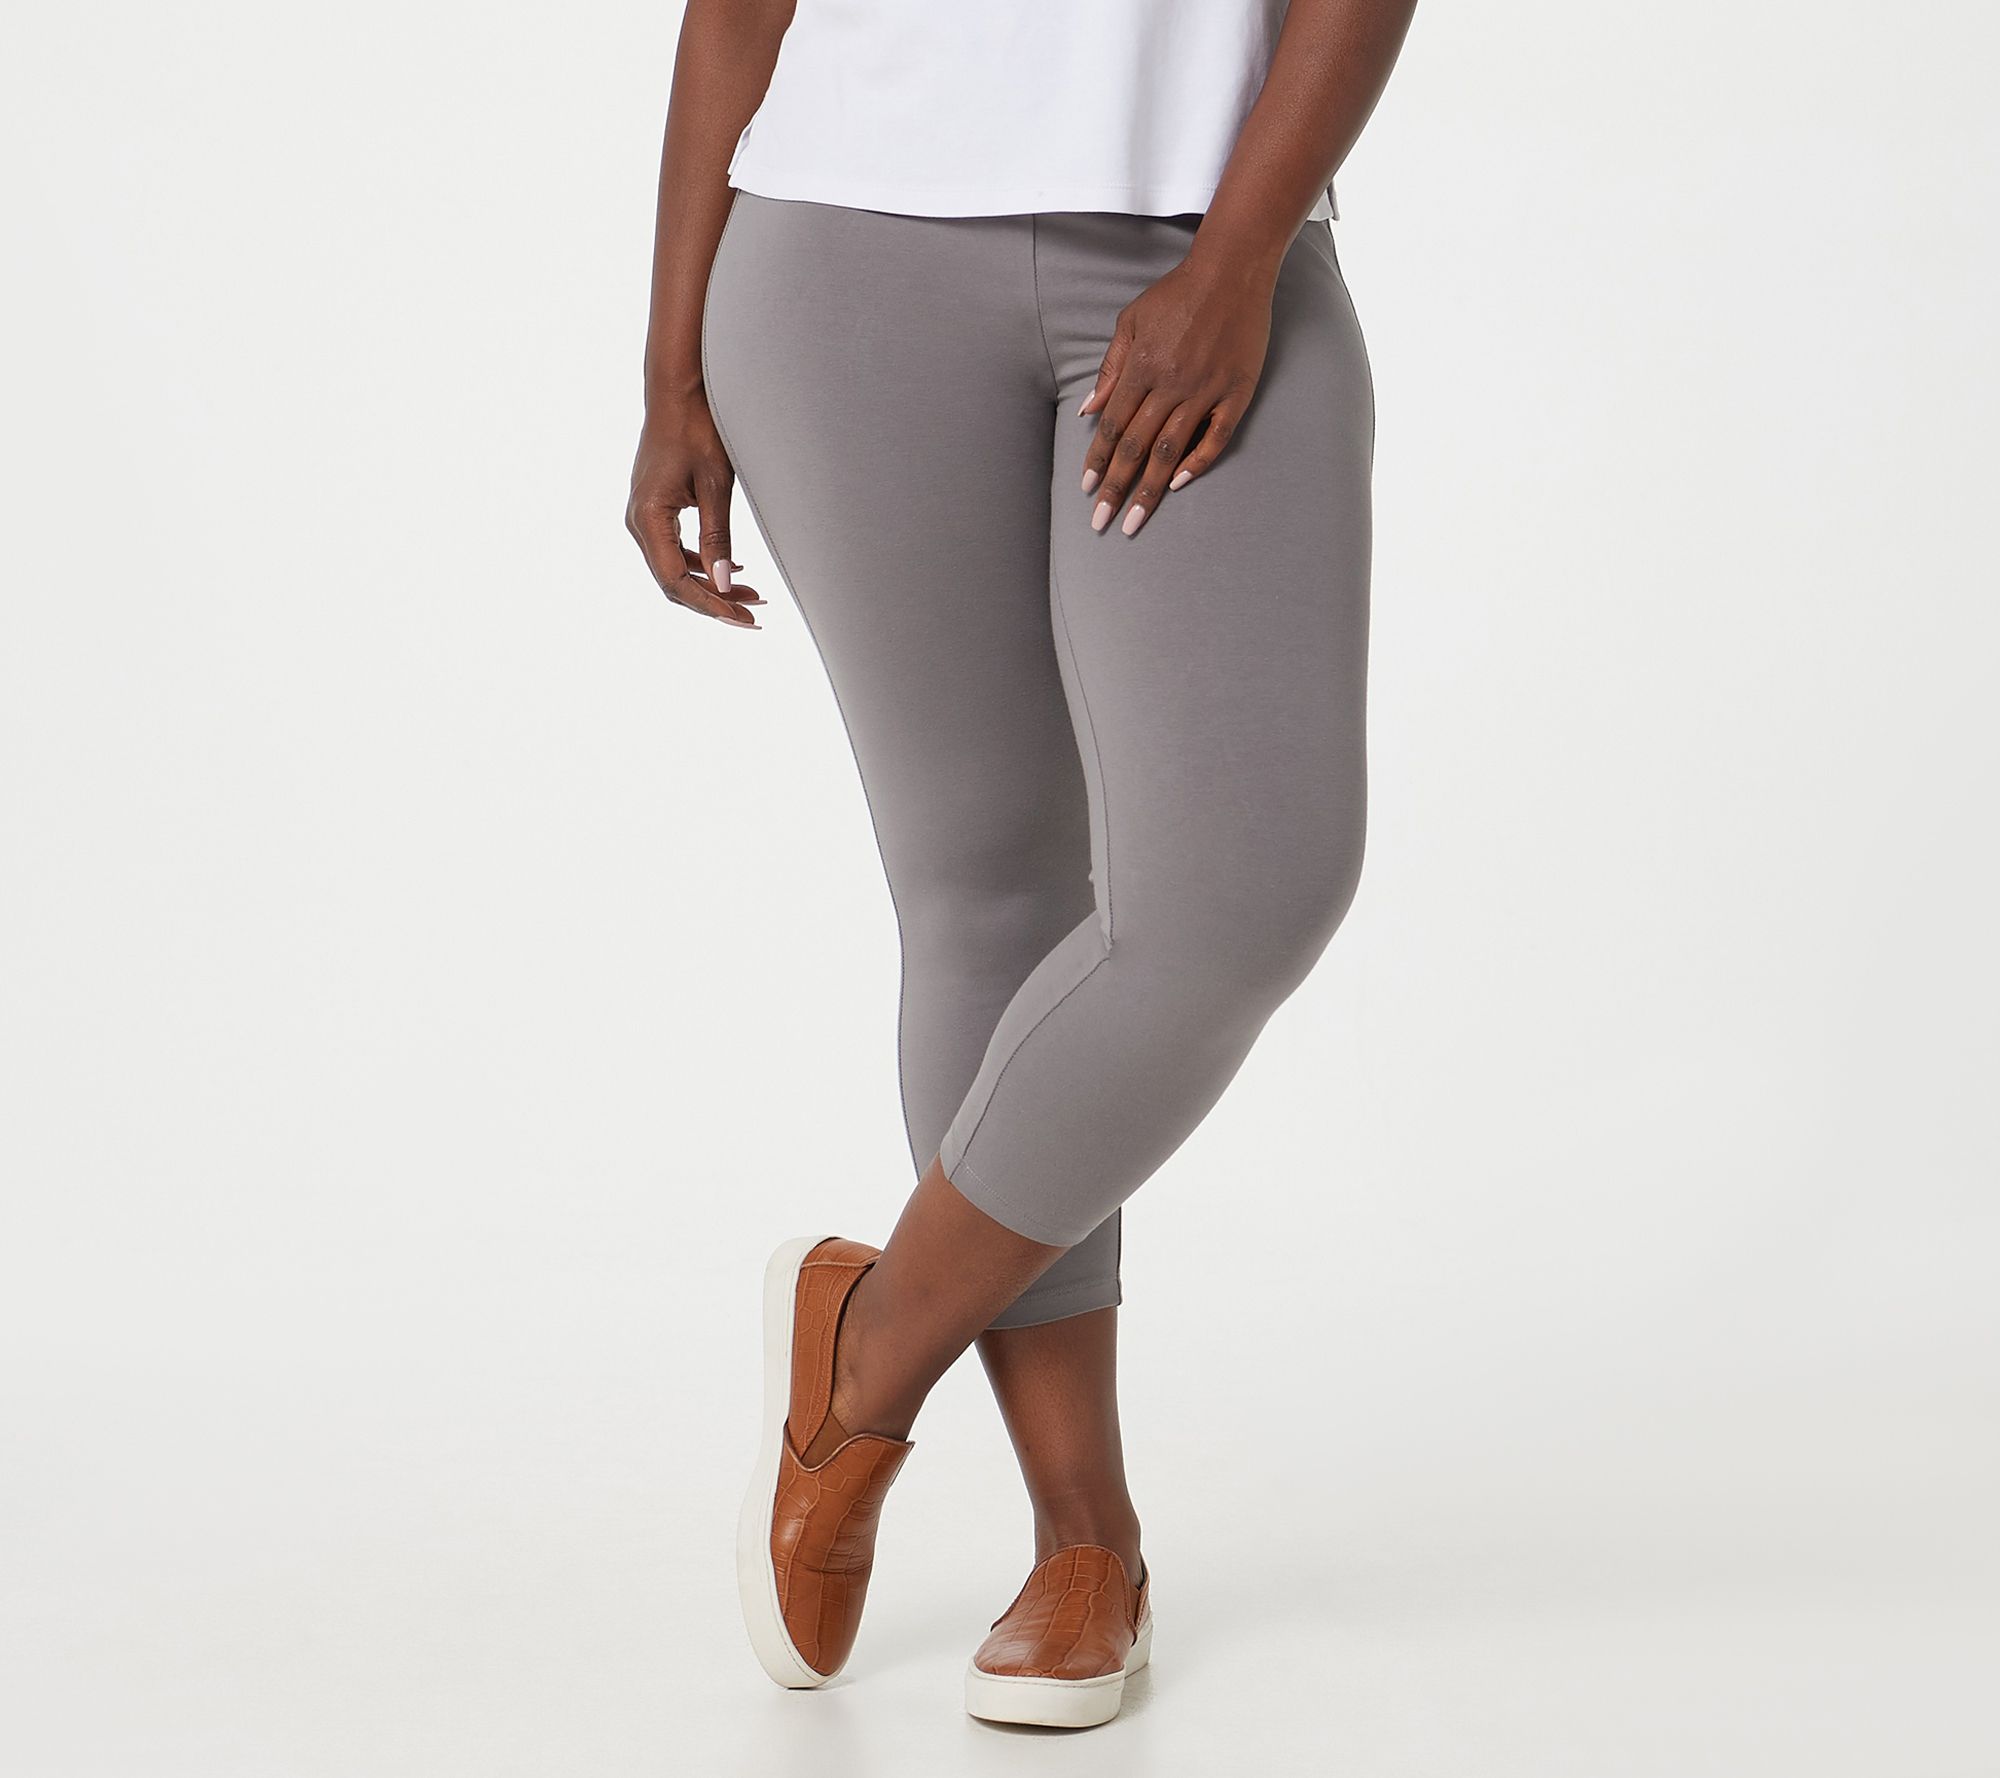 LOGO Layers by Lori Goldstein Petite Lace Trim Leggings with Pockets